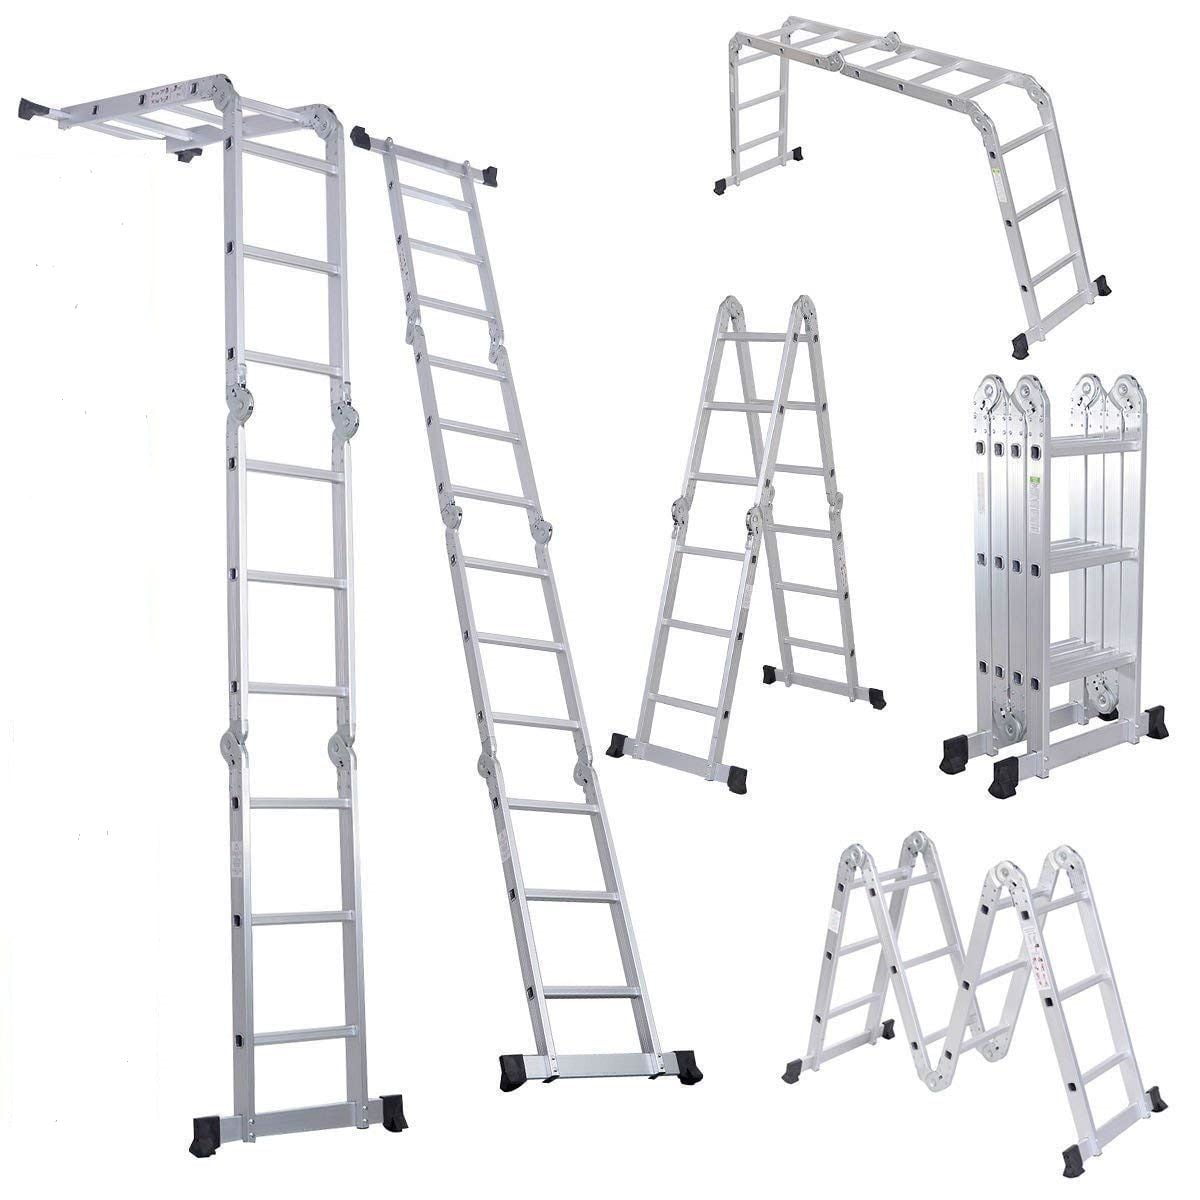 Aluminium Telescopic Extension Straight Ladder Multi-Purpose Ladder with Spring Loaded Locking Mechanism for Home Outdoor Working 3.8M/12.5FT 330 lbs Load 